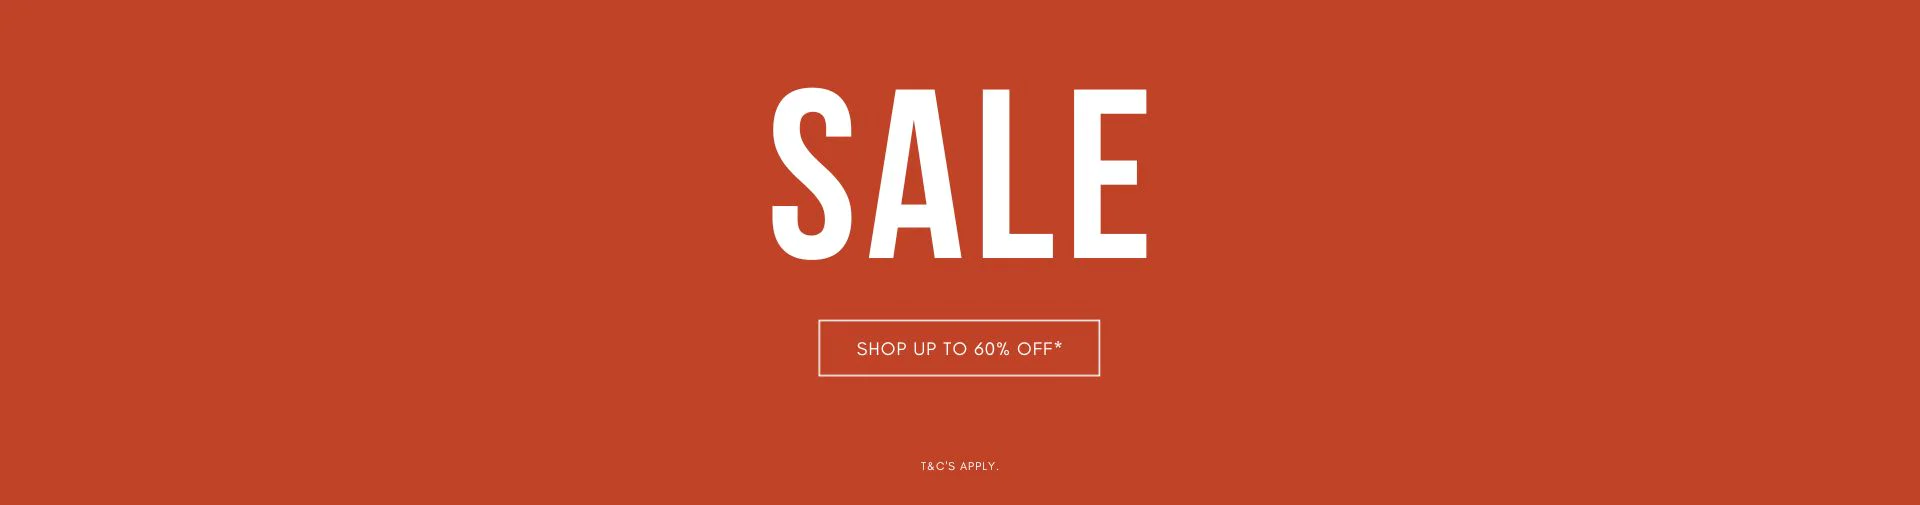 Up to 60% OFF on End of Season sale items at Famous Footwear